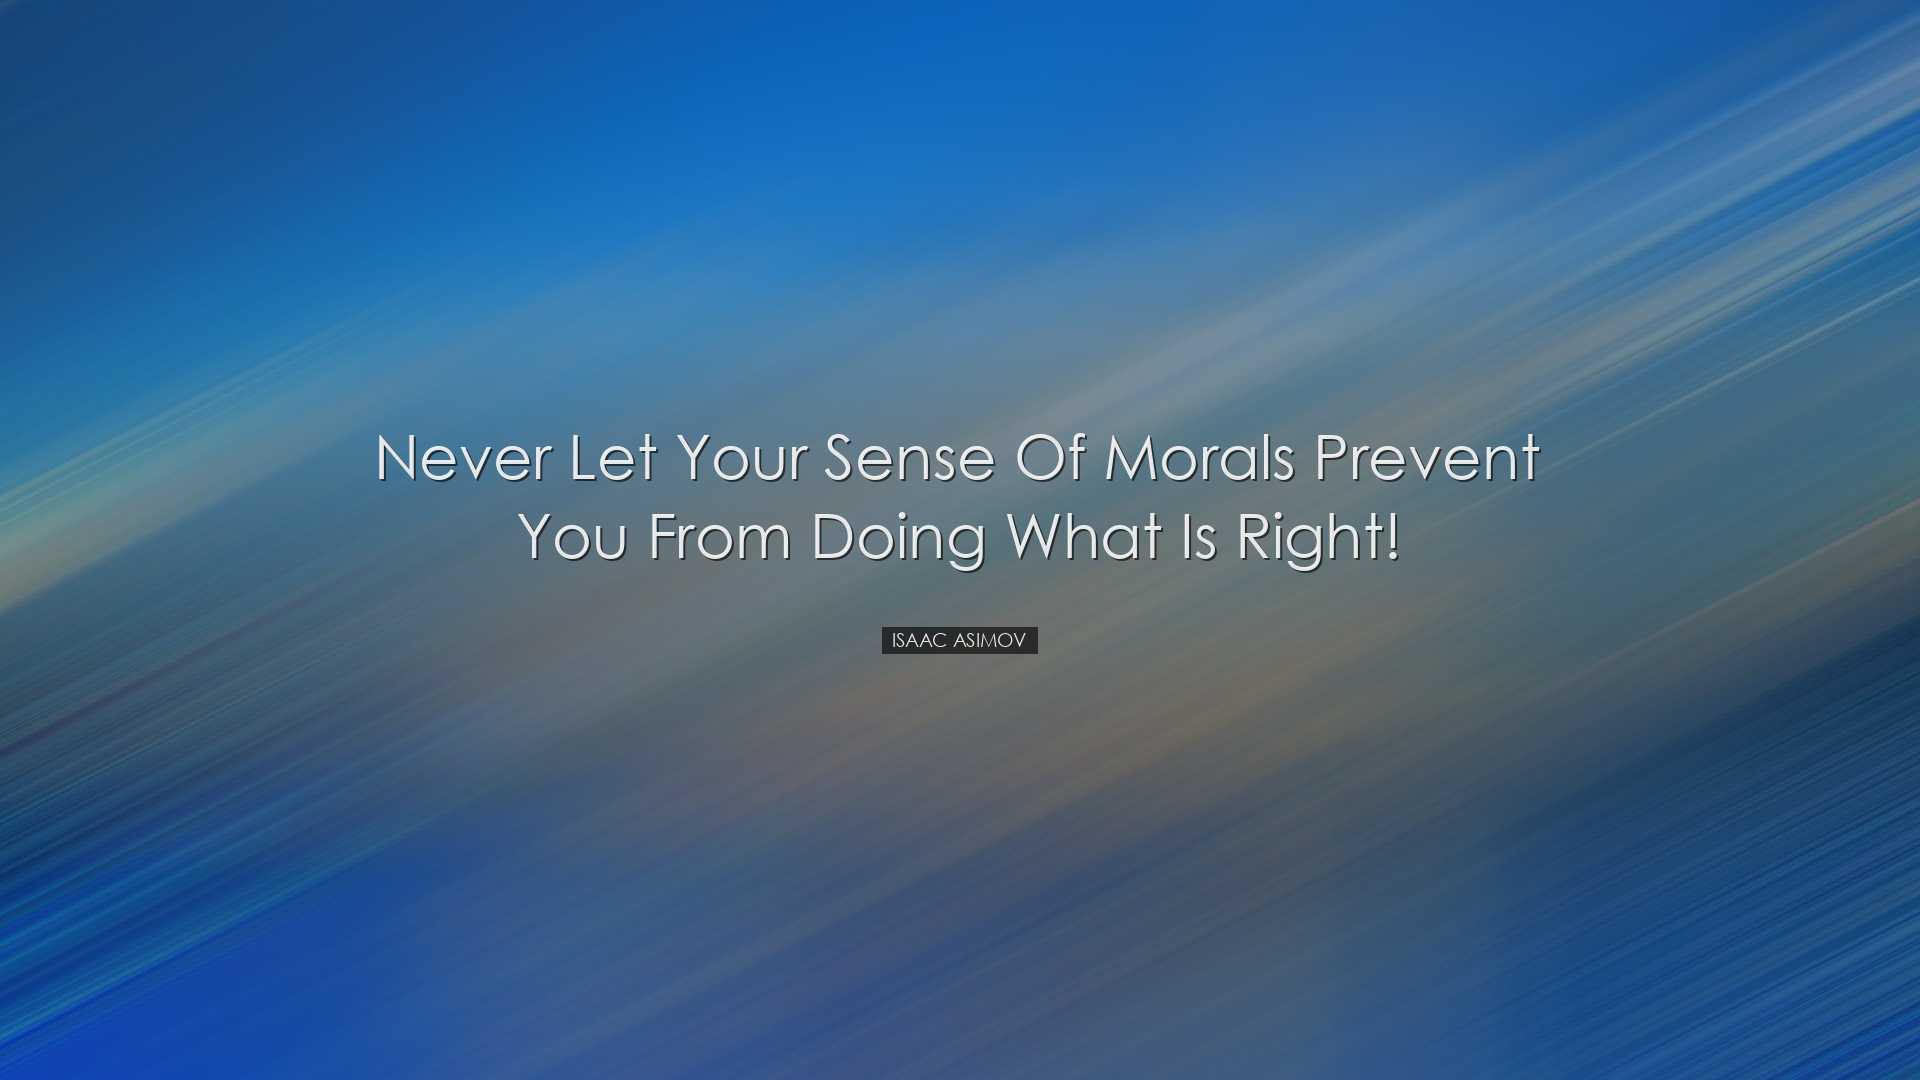 Never let your sense of morals prevent you from doing what is righ